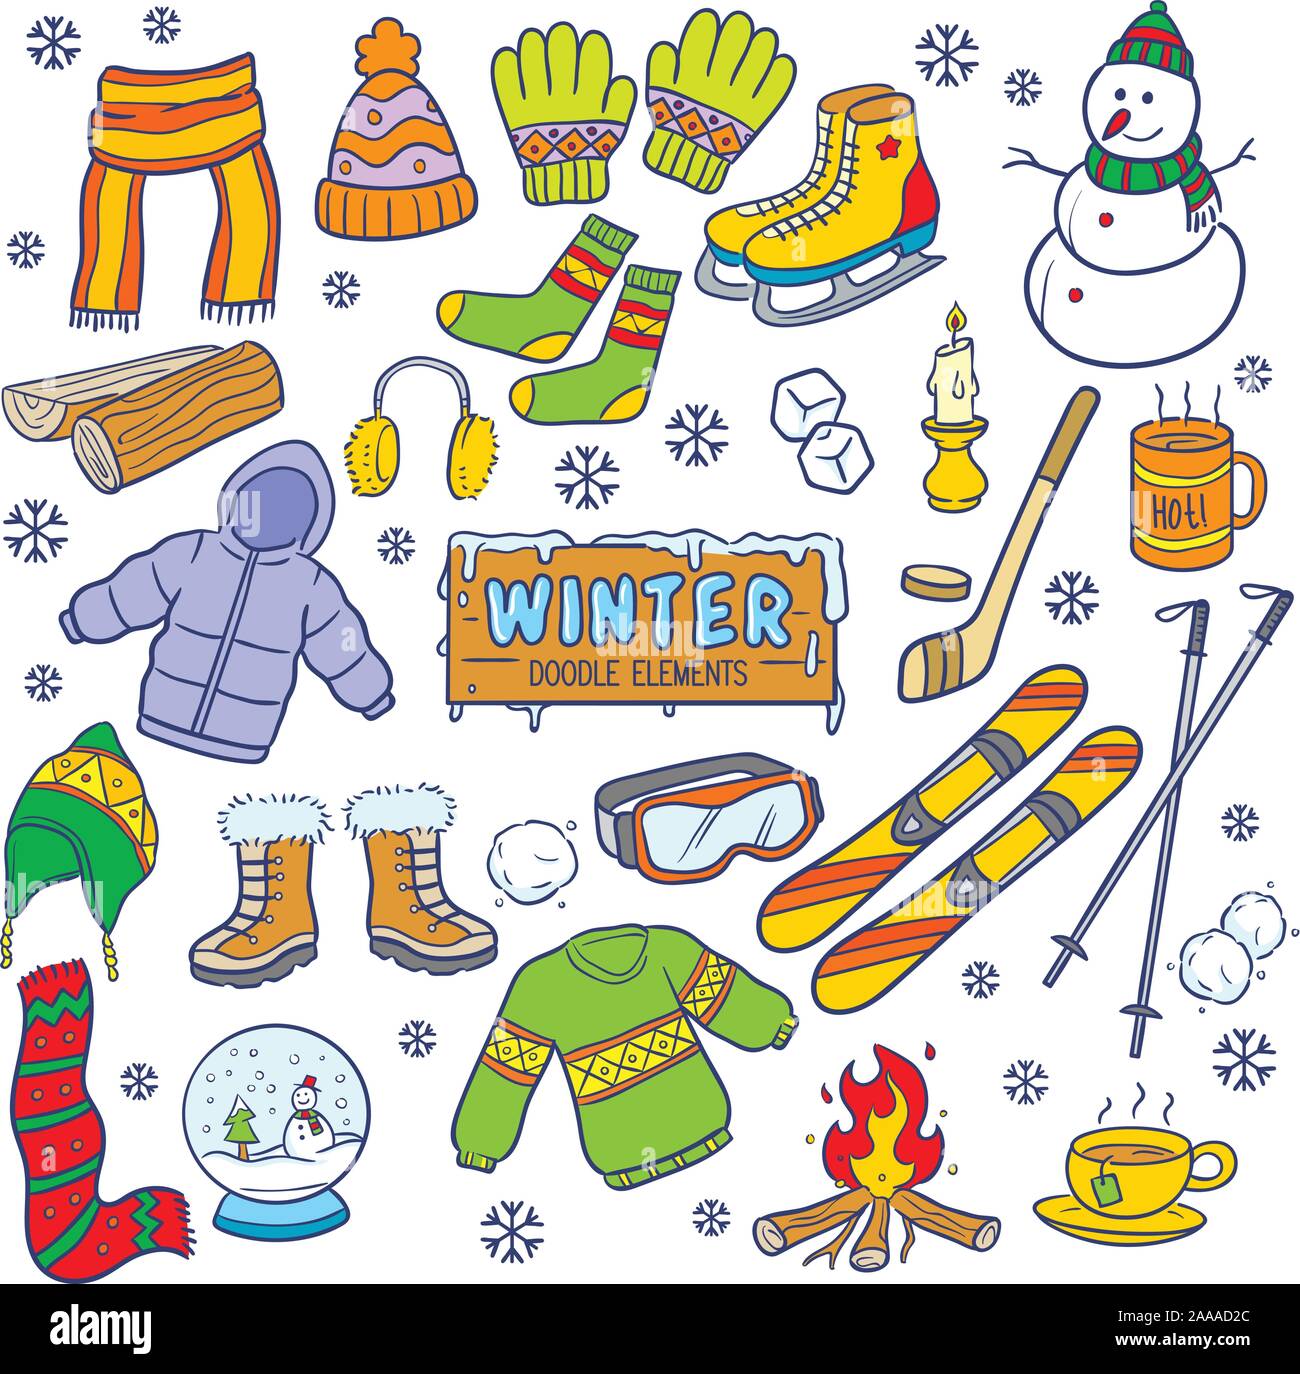 Winter season doodle and hand drawn elements in color isolated ...